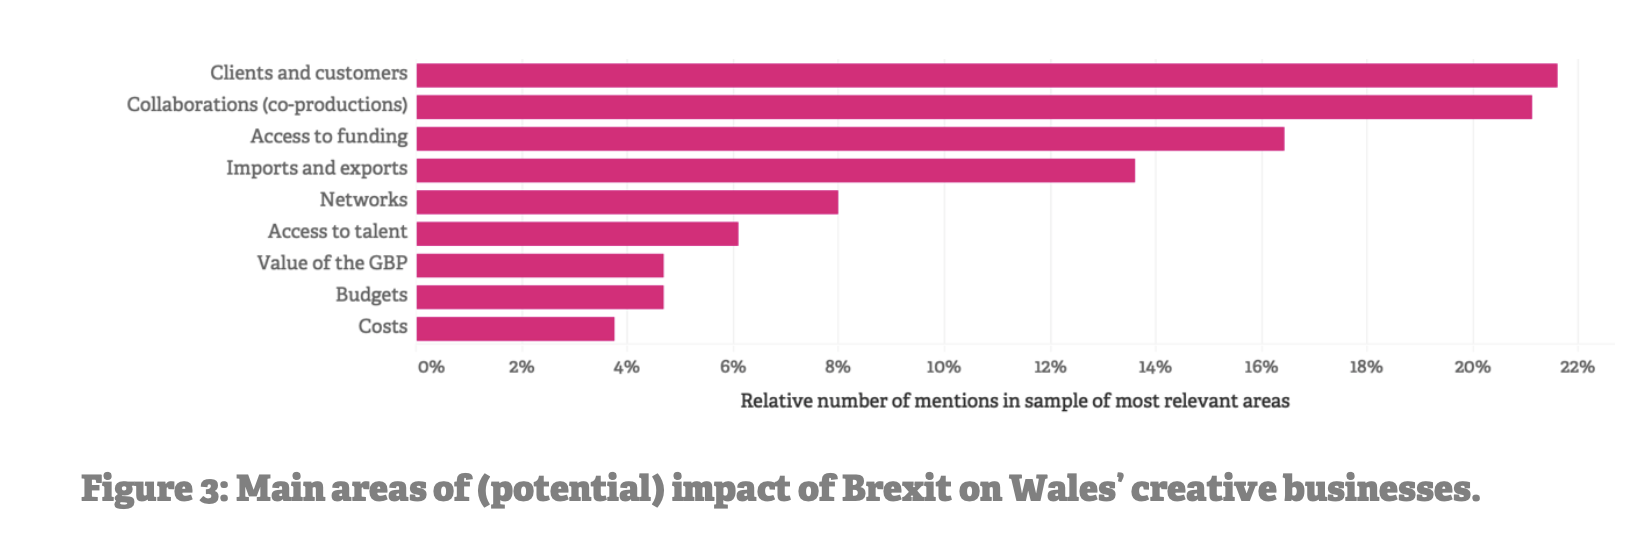 Bar chart of main areas of (potential) impact of Brexit on Wales’ creative businesses.